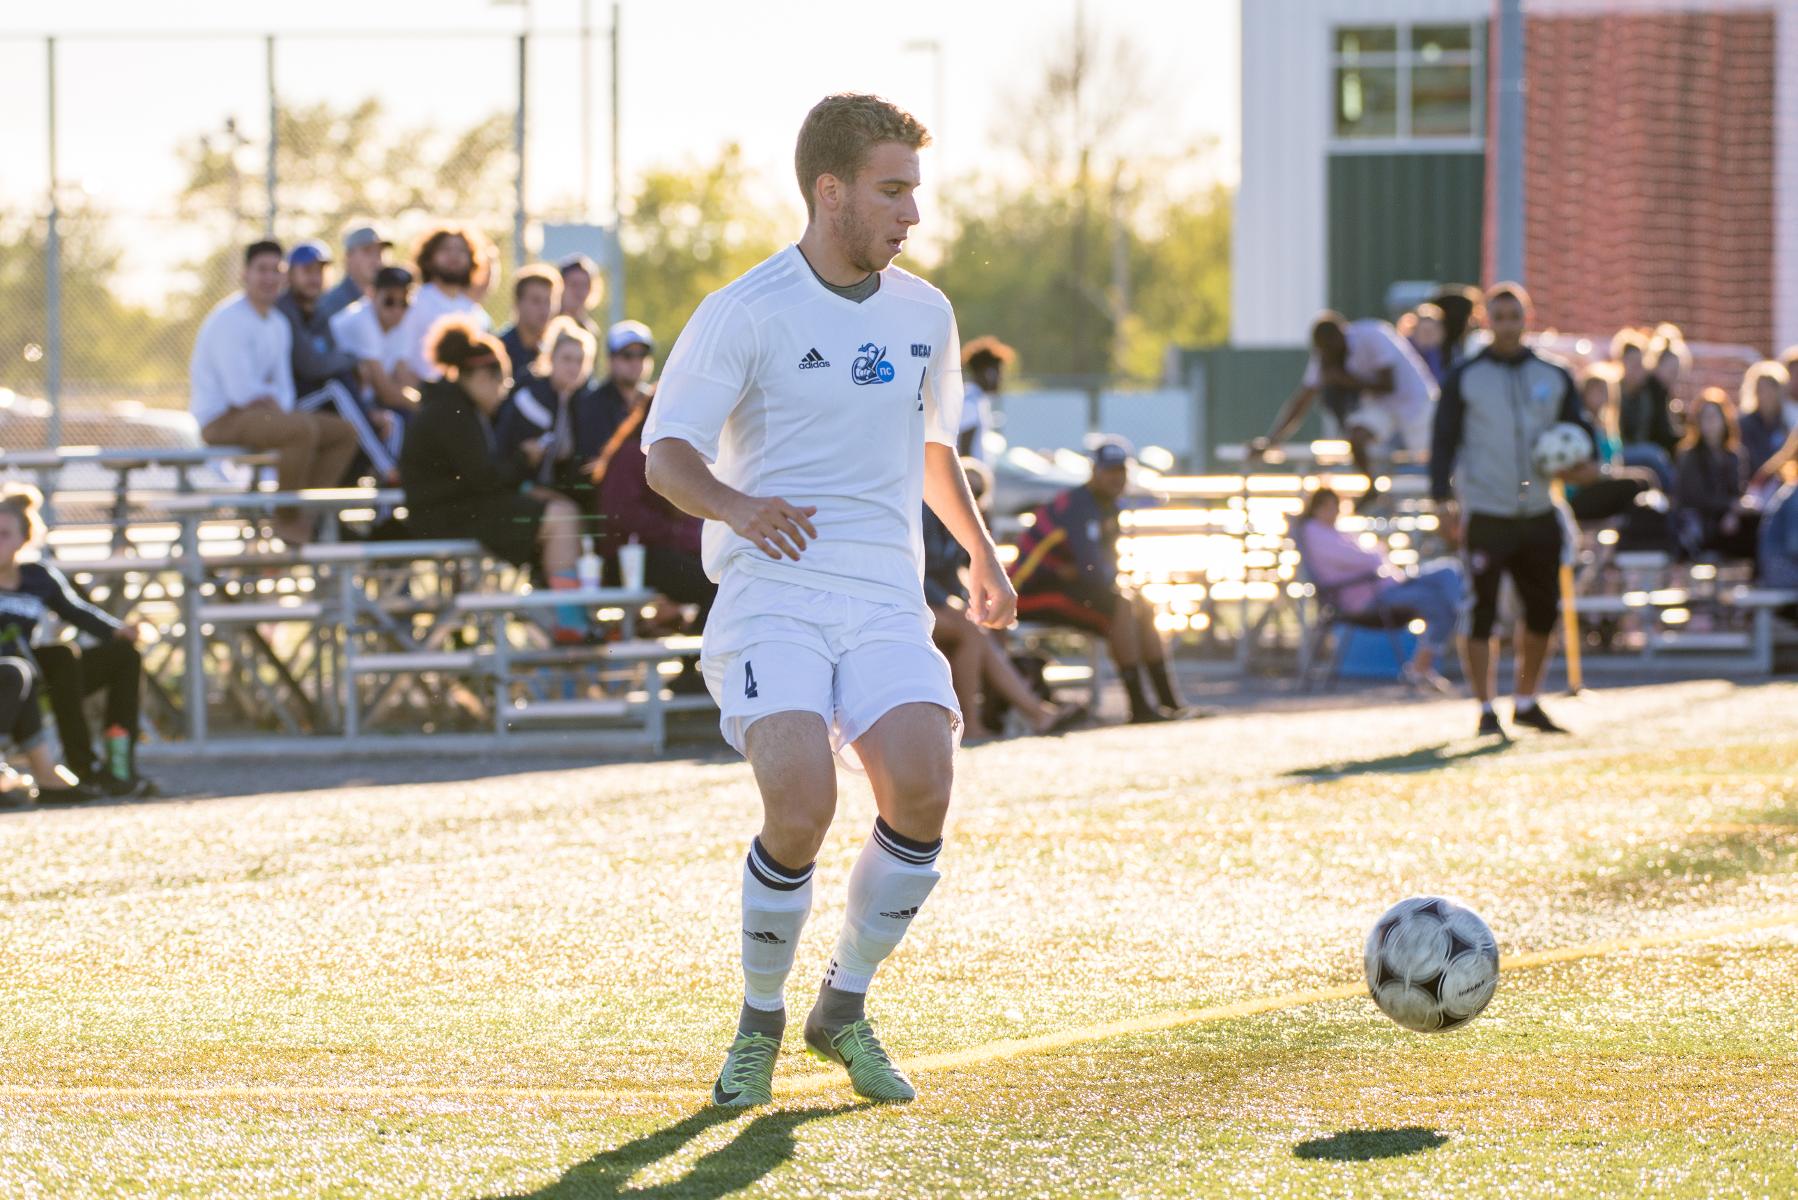 Preview: Men’s Soccer look to rebound in home debut